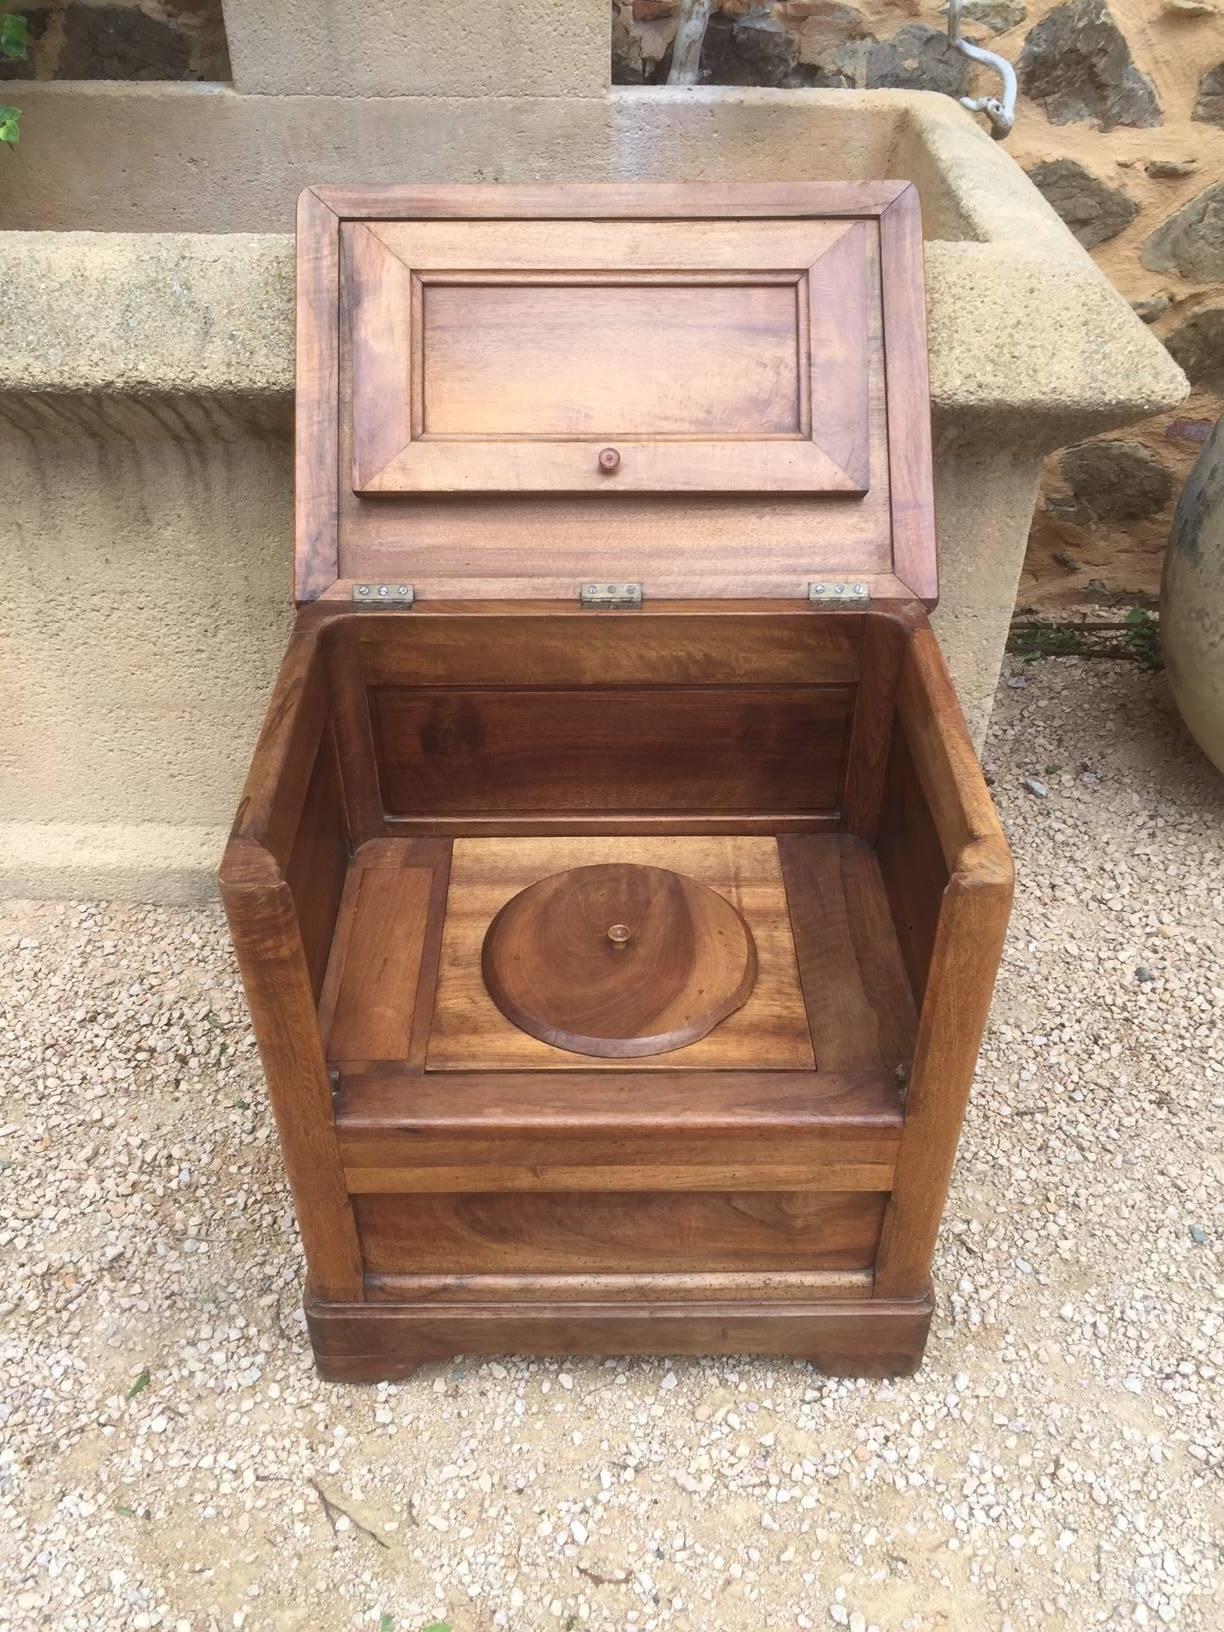 Rare piece: French old walnut cabinet, it is a hiding toilet.
There is a hiding part to put the toilet paper. There are two metal handles at the extremities.